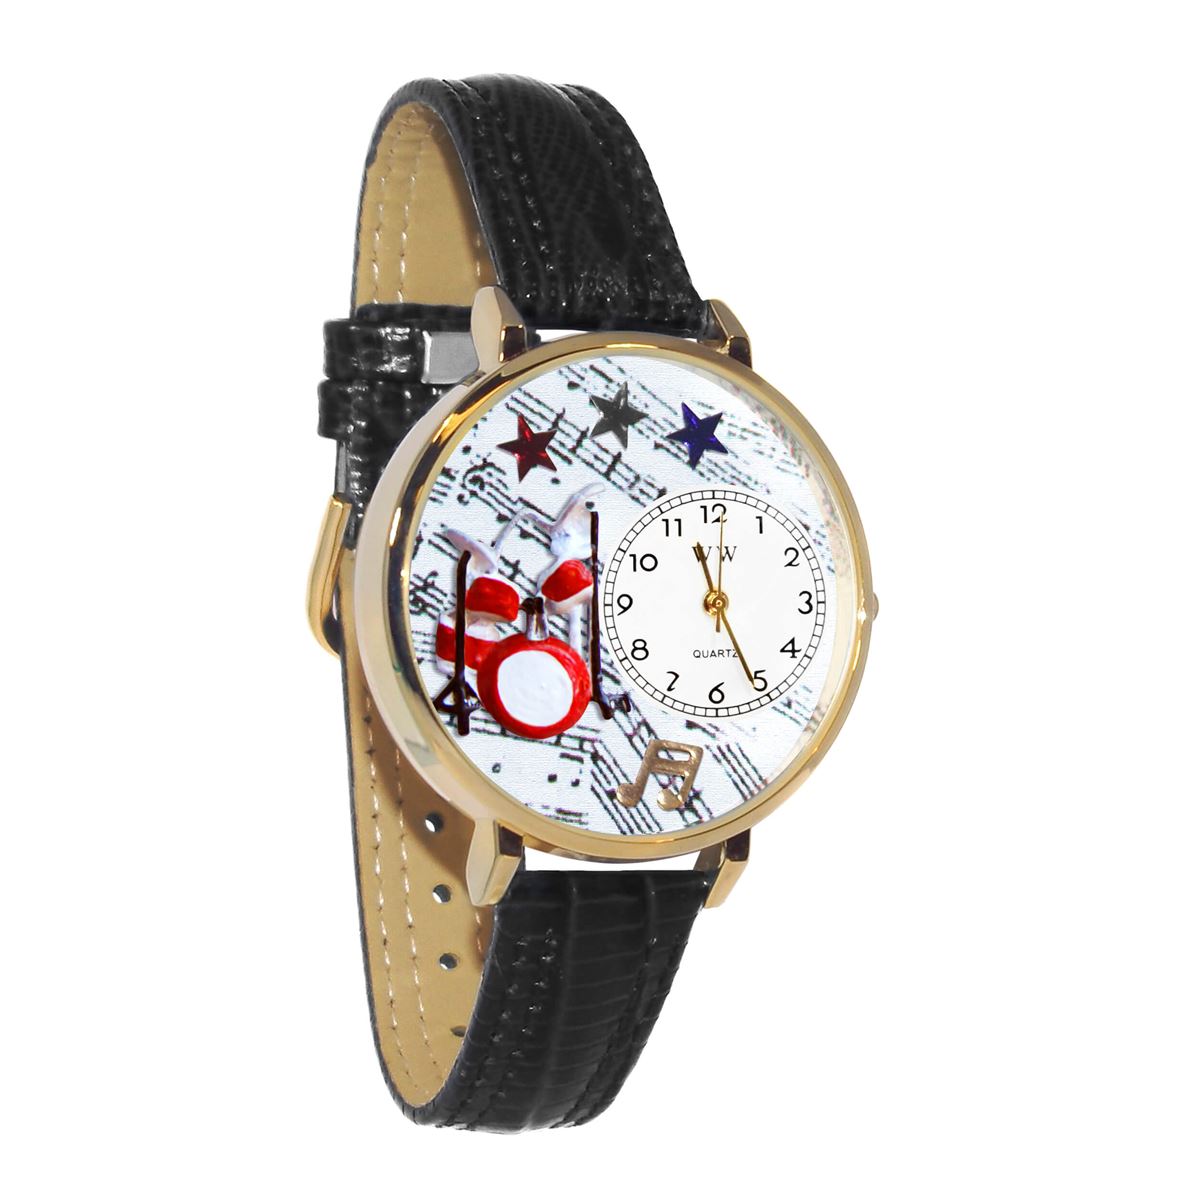 Whimsical Gifts | Drums 3D Watch Large Style | Handmade in USA | Hobbies & Special Interests | Music | Novelty Unique Fun Miniatures Gift | Gold Finish Black Leather Watch Band